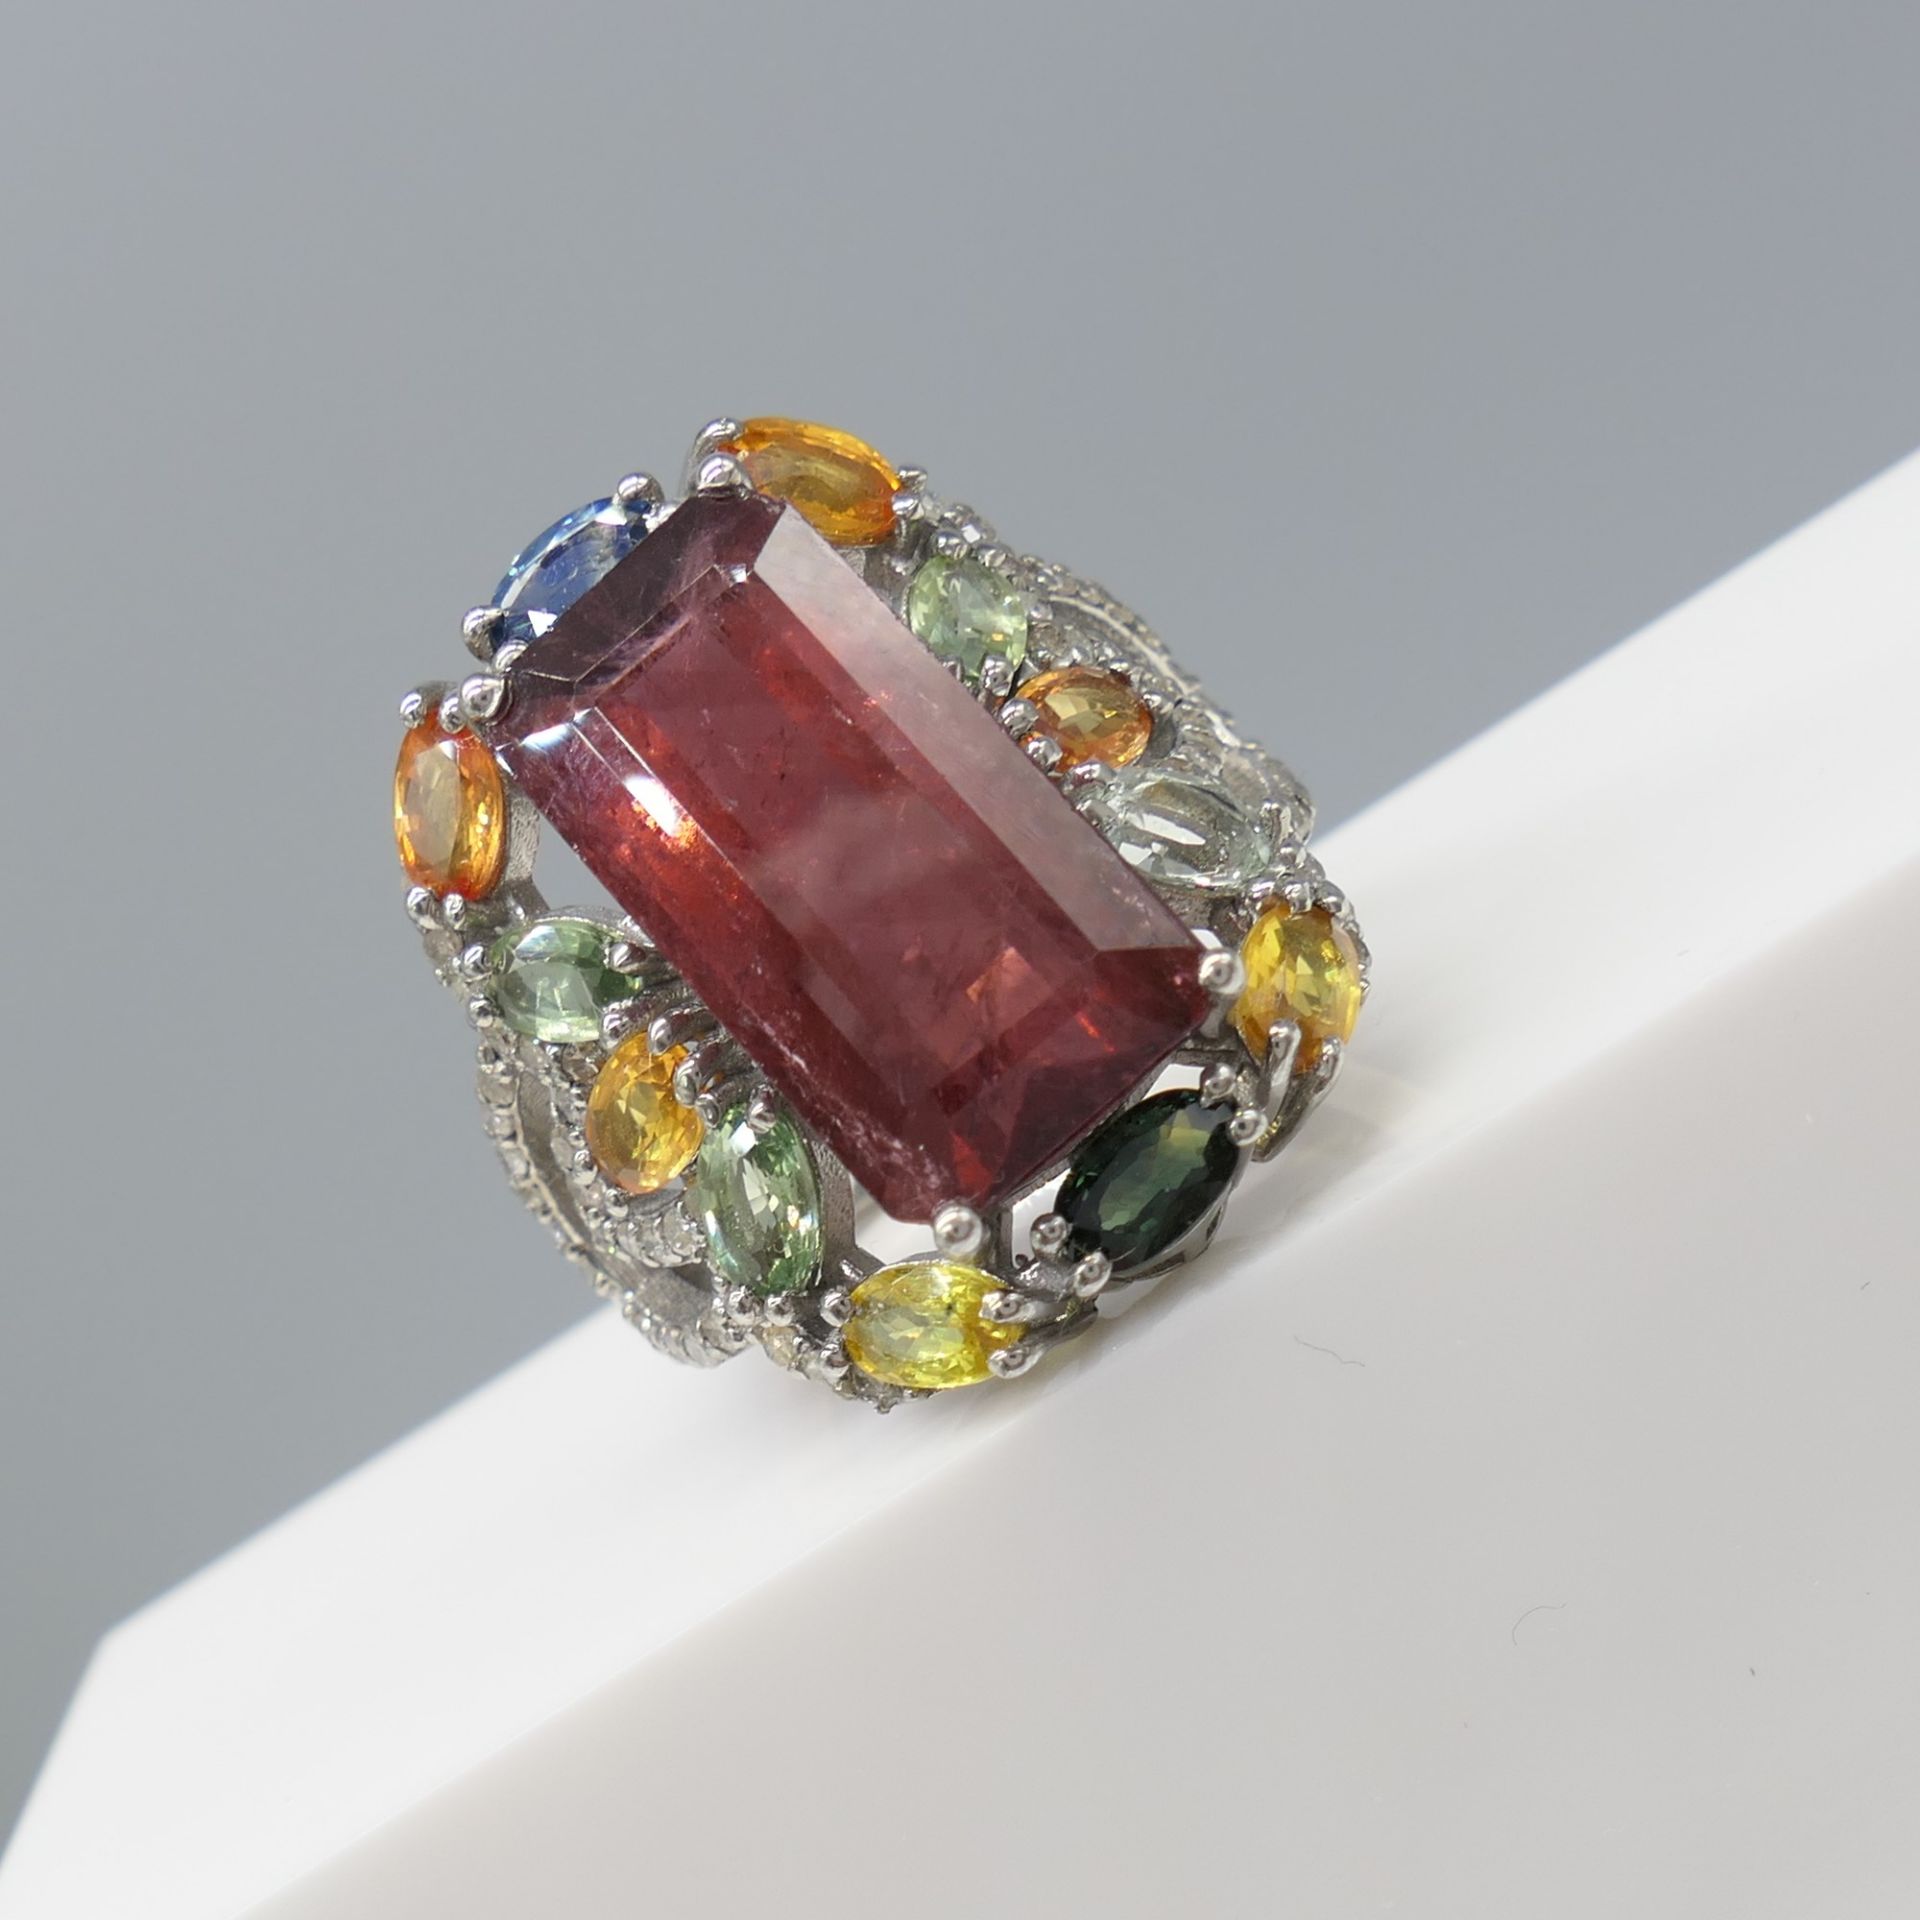 Large Dress Ring Set With Tourmaline, Multi-Coloured Sapphires and Diamonds - Image 7 of 7